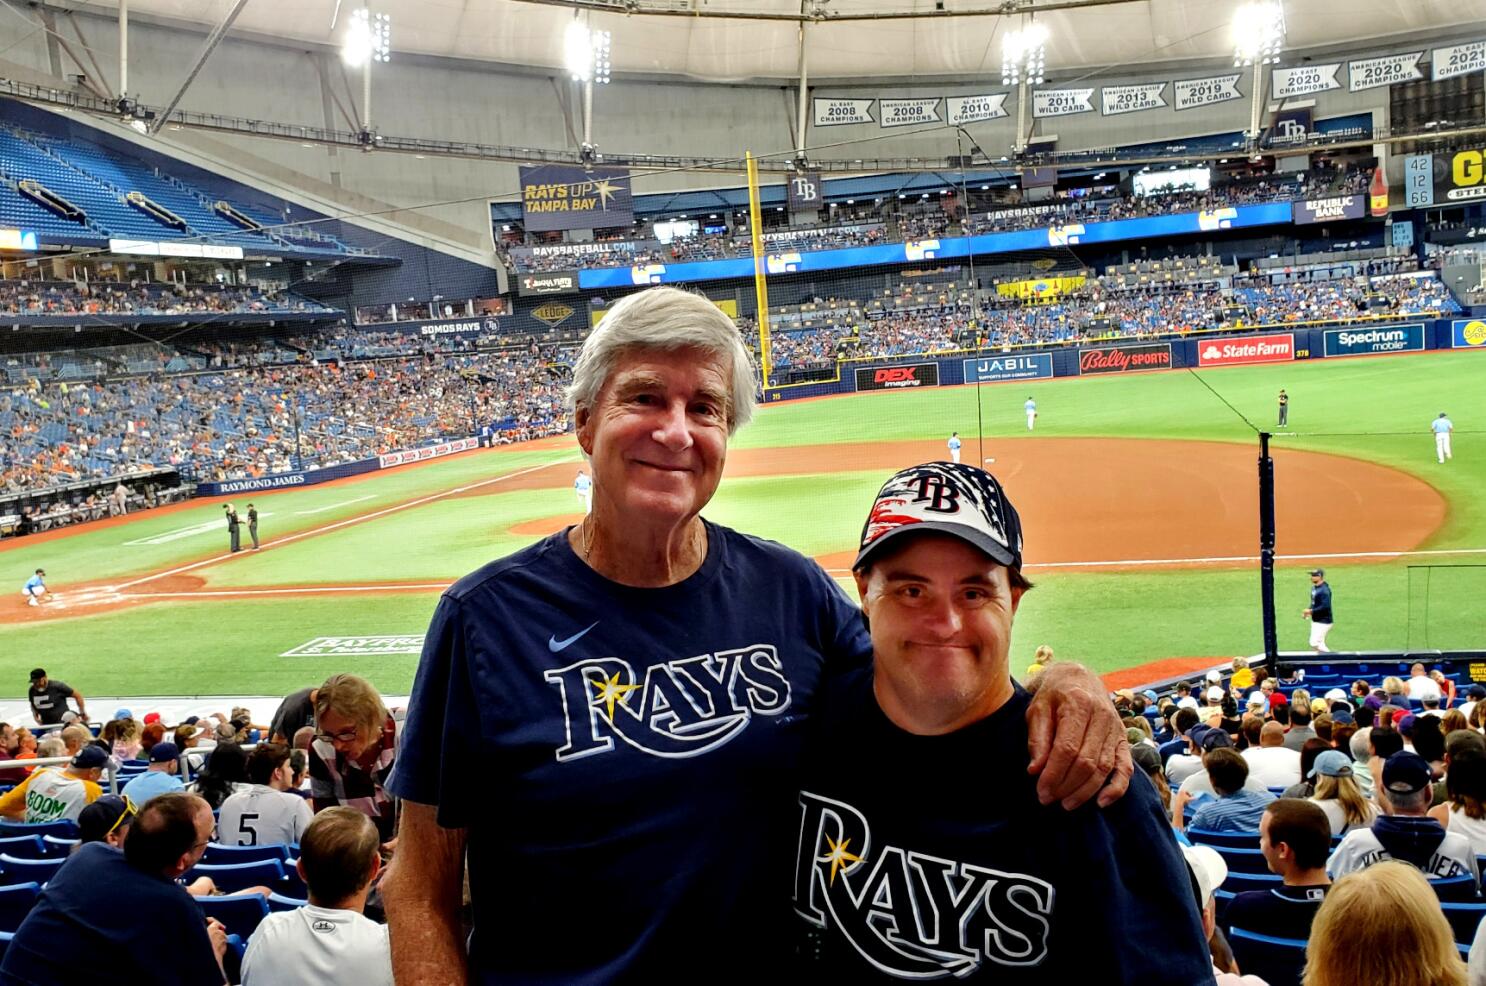 Ultimate Family Guide to Tropicana Field for the Tampa Bay Rays